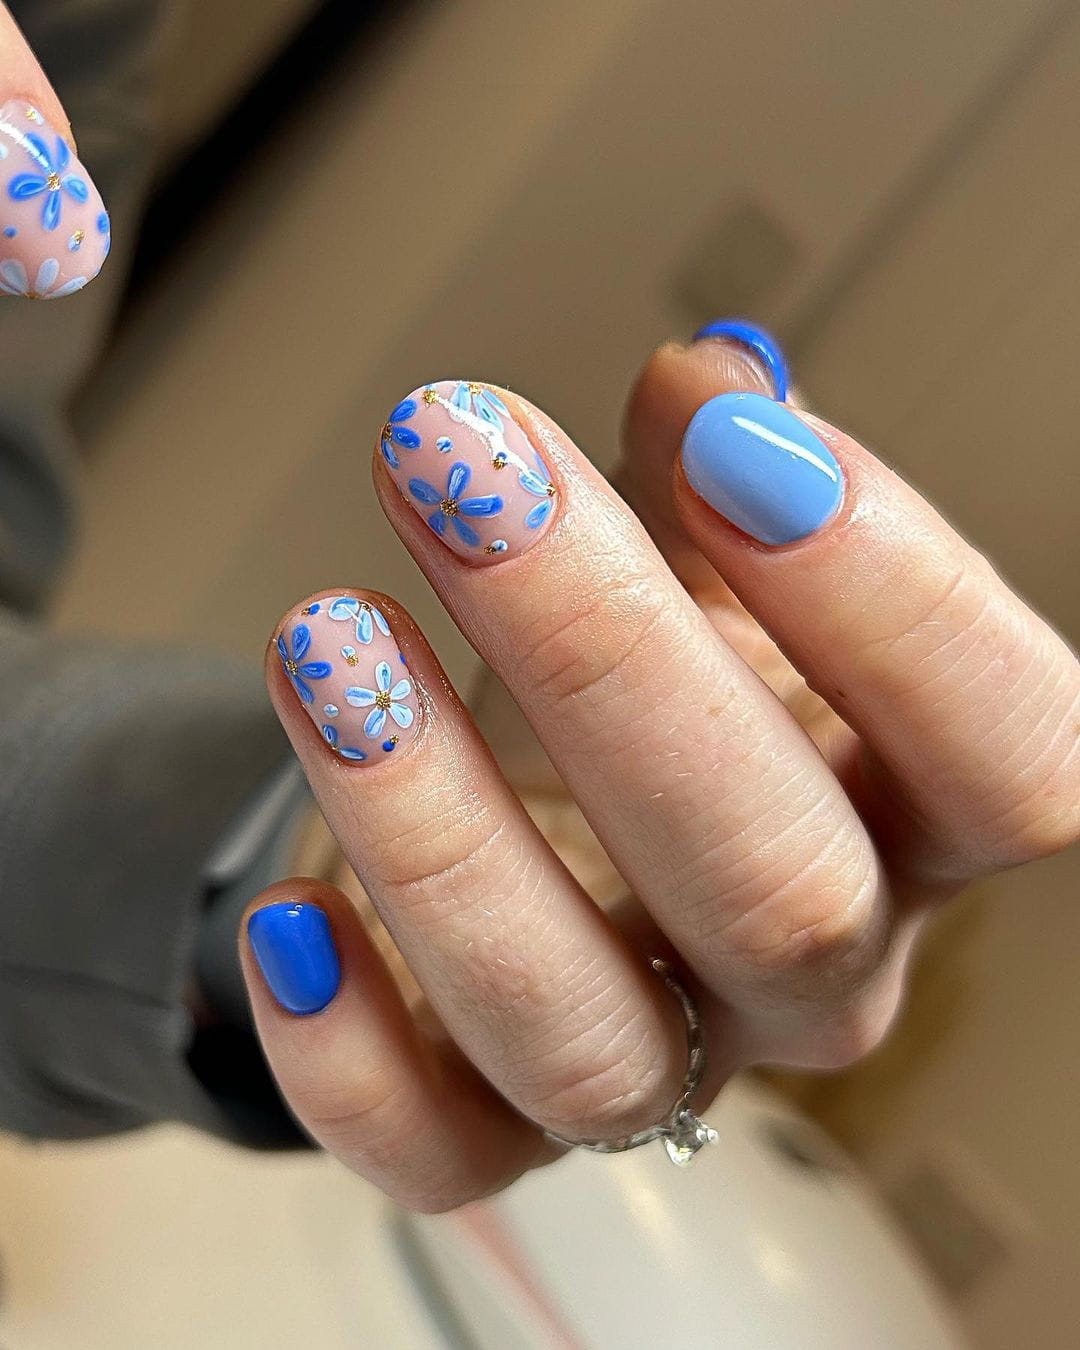 100+ Short Nail Designs You’ll Want To Try This Year images 59